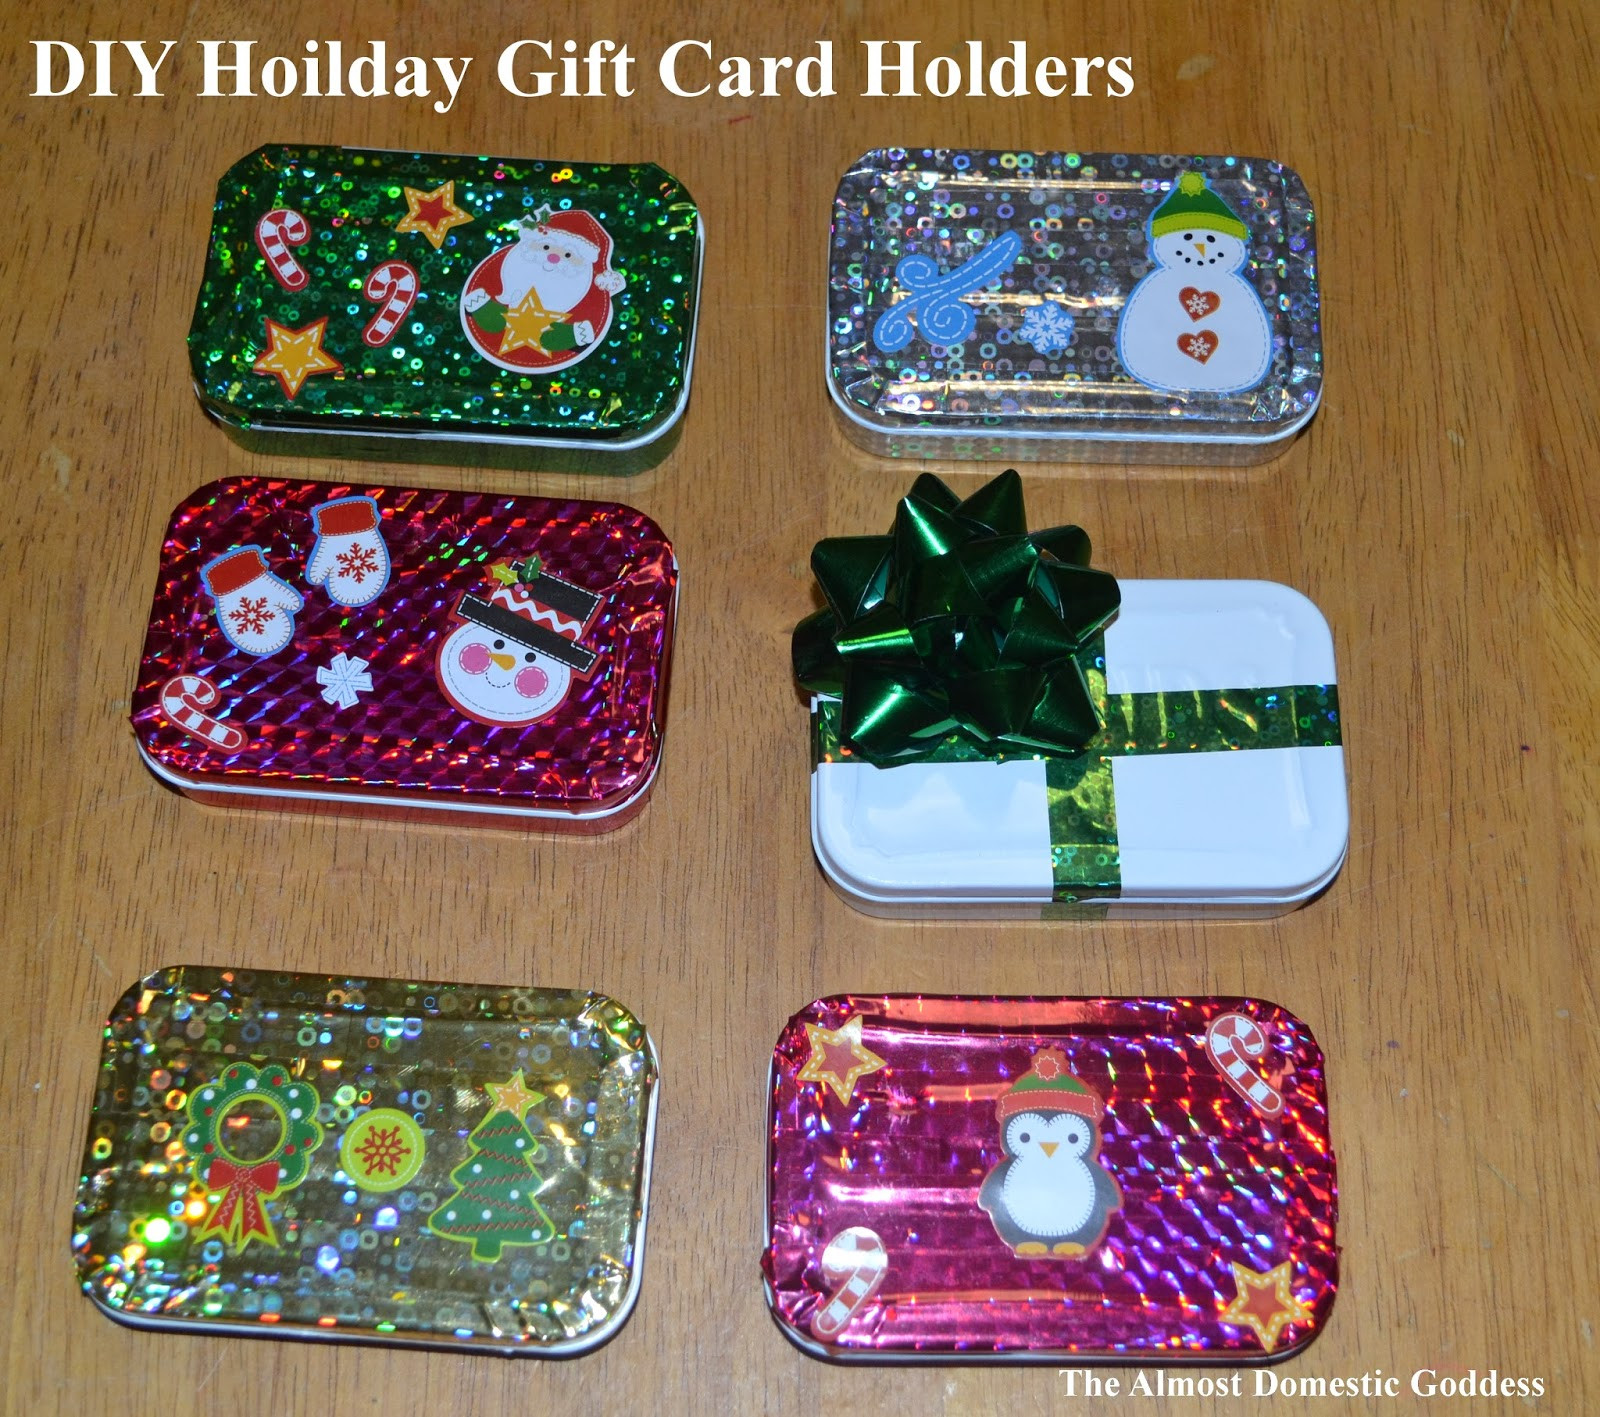 DIY Christmas Gift Card Holder
 The Almost Domestic Goddess DIY Holiday Gift Card Holders